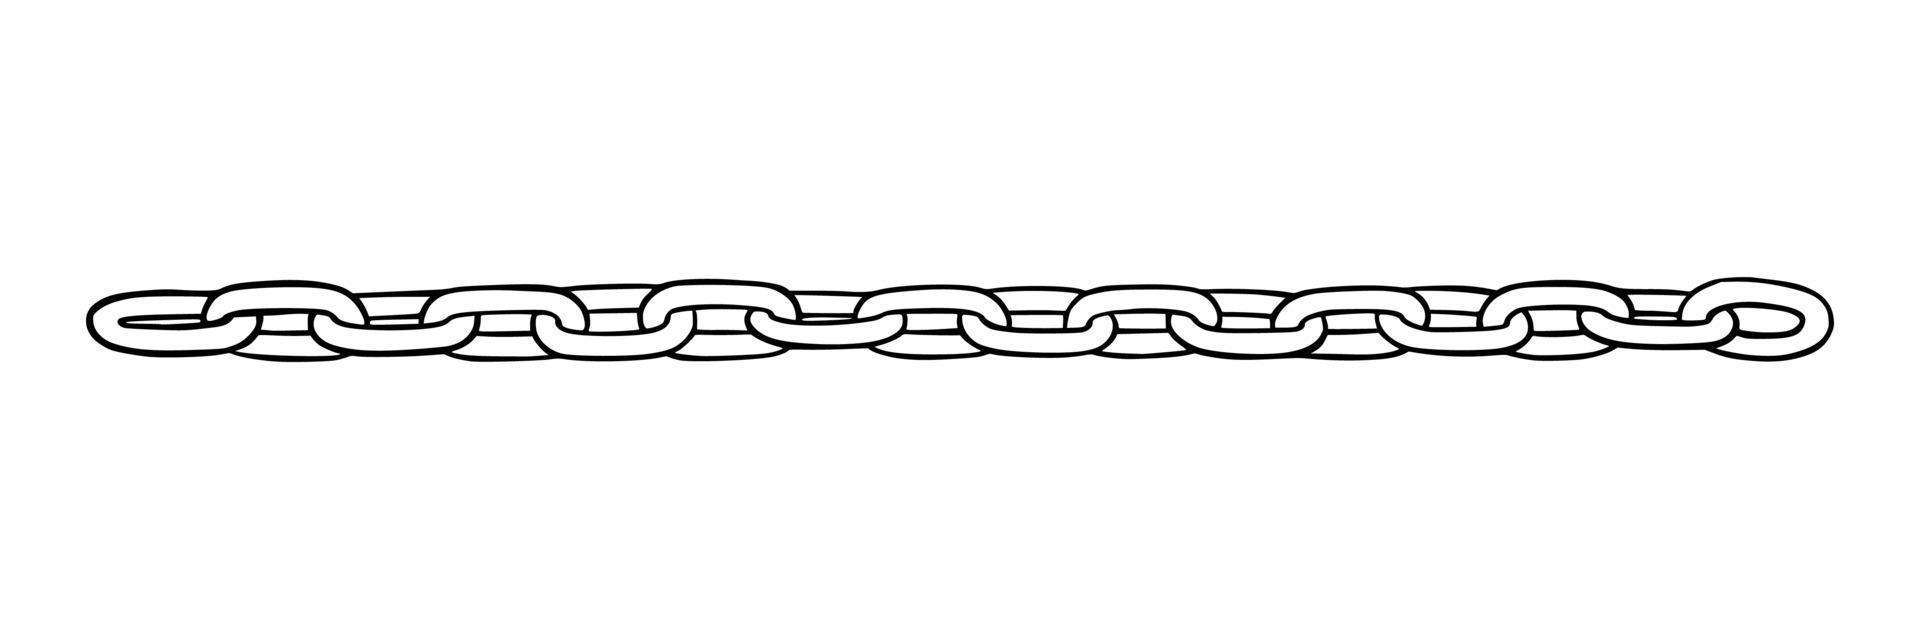 Chain as symbol of unity and cooperation. Sketch of metal chains. Vector illustration